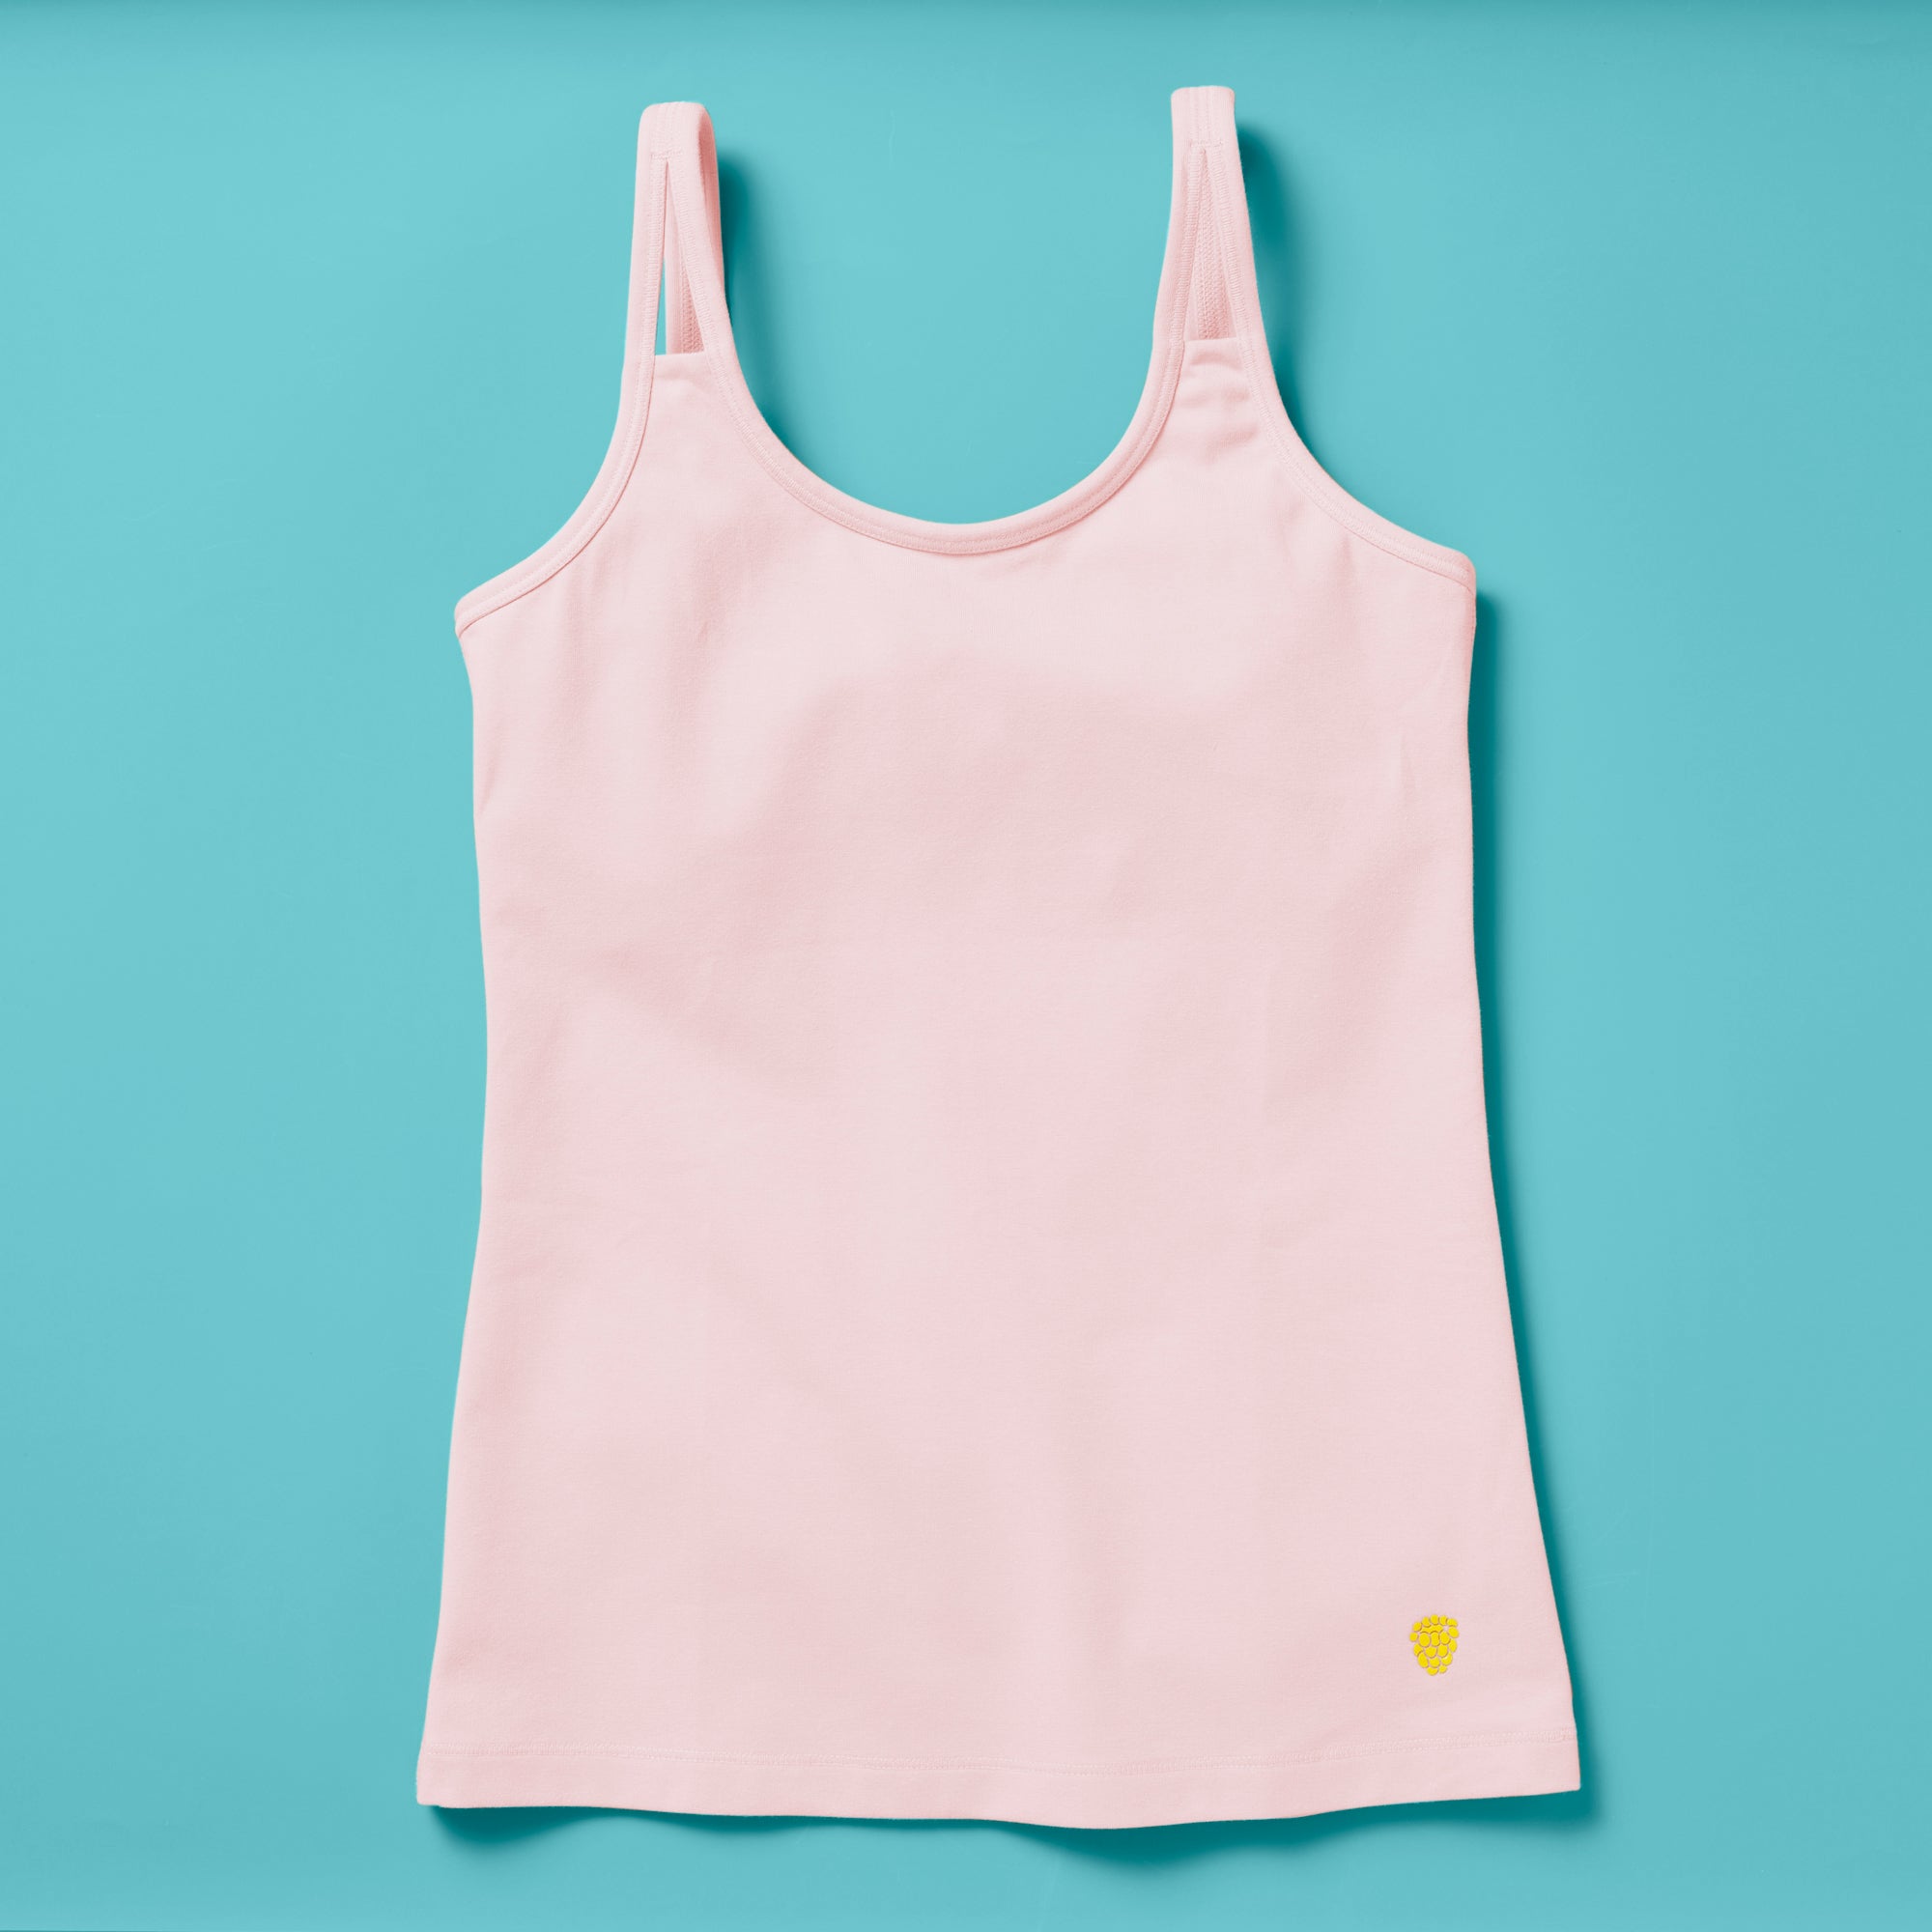 Square Top Camisole for Girls - Yellowberry